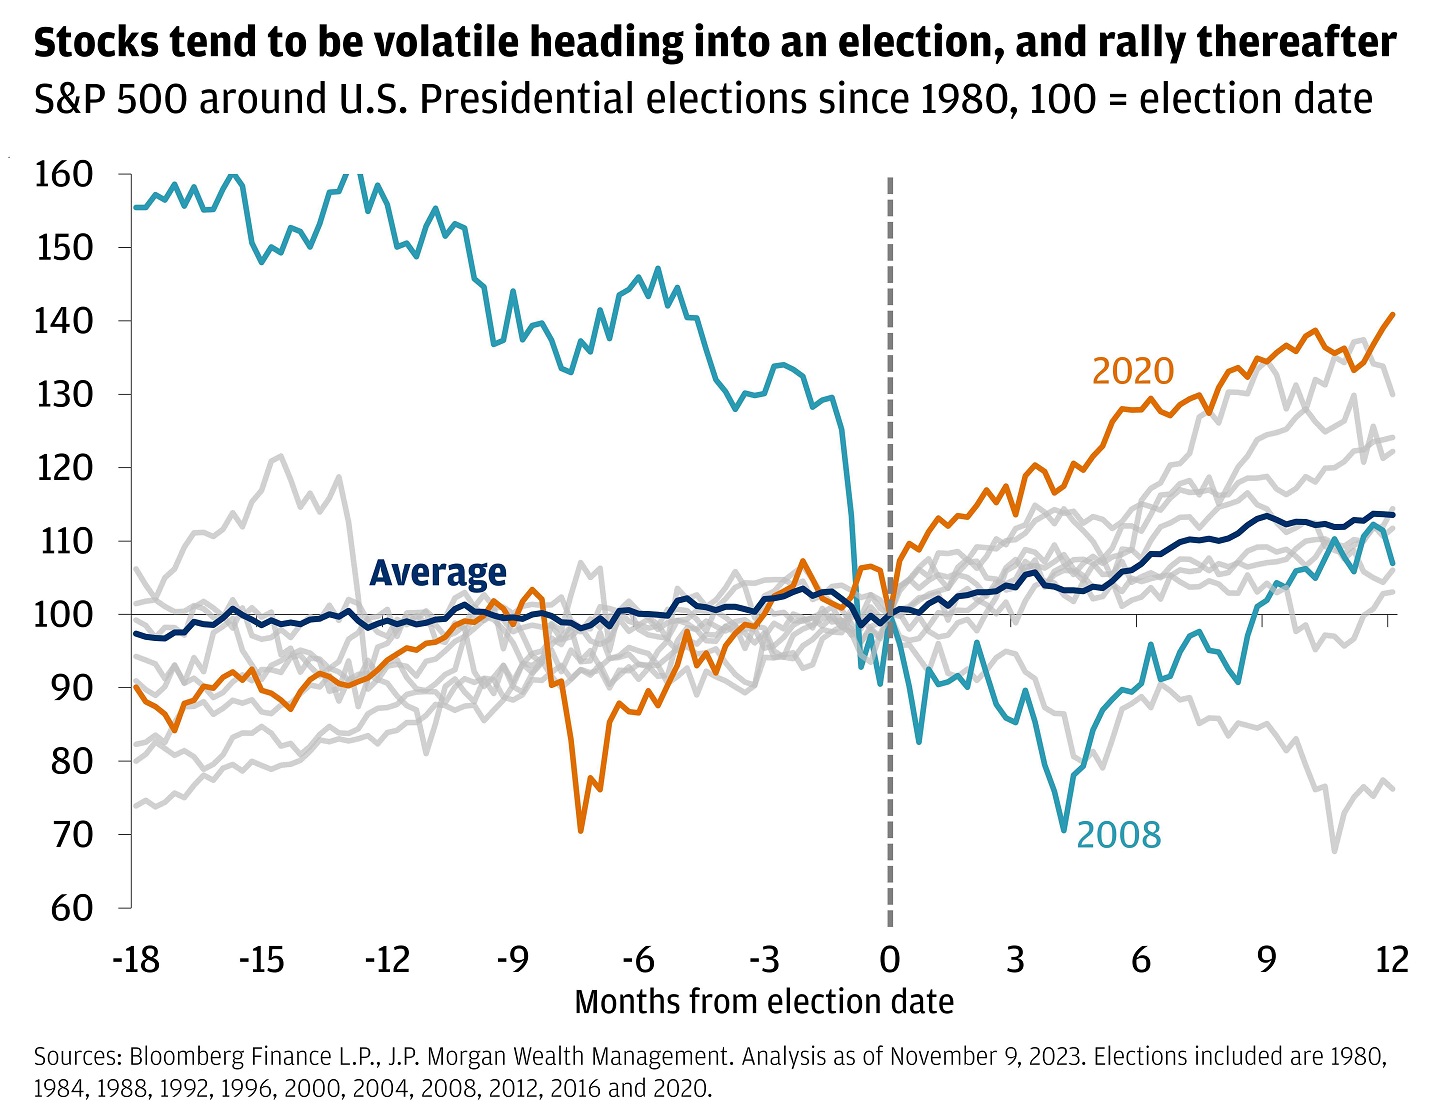 This line chart shows the S&P 500 level around U.S. presidential elections going back to 1980, index to 100 as of the week of the election.